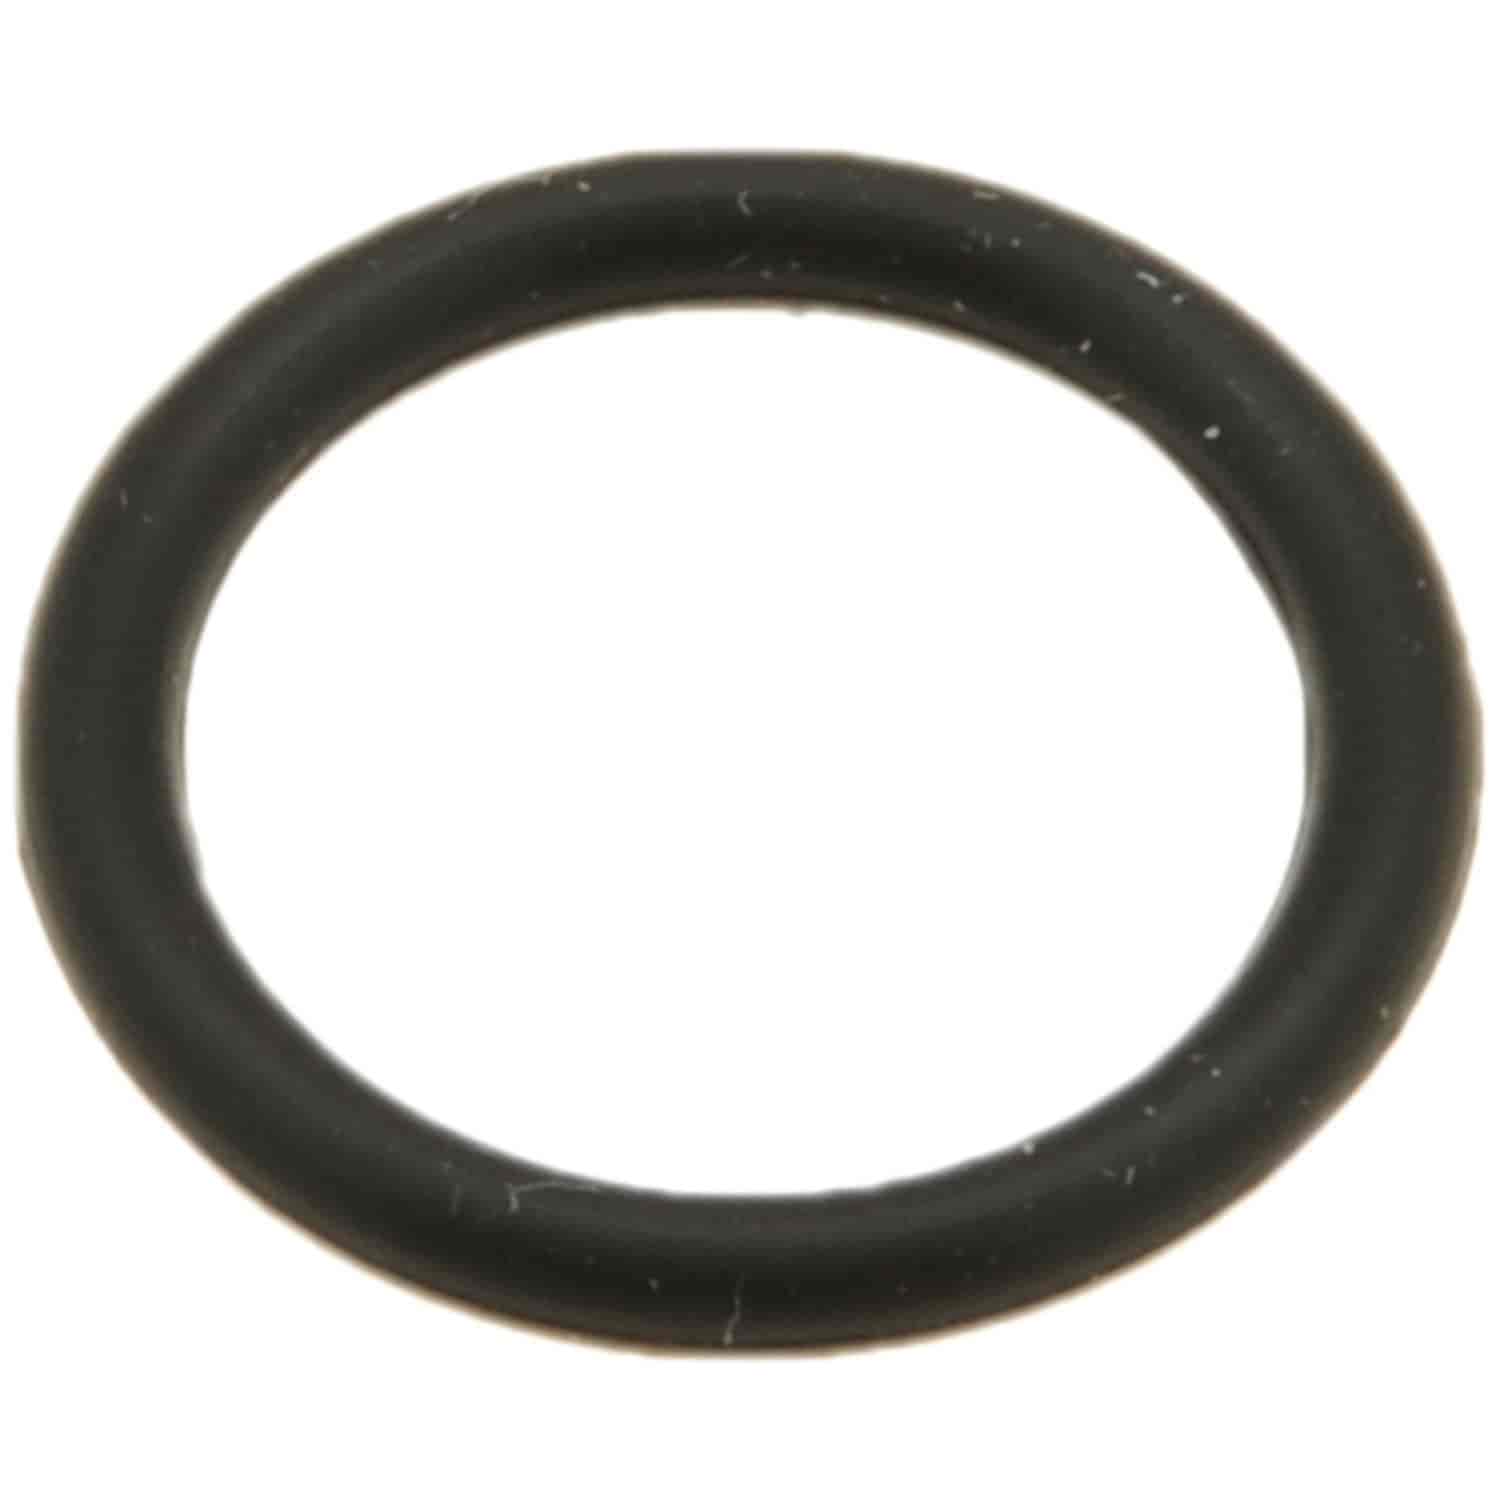 Water Pipe Sealing Ring MERCEDES 1796CC 1.8L DOHC 16V 271.948 2003